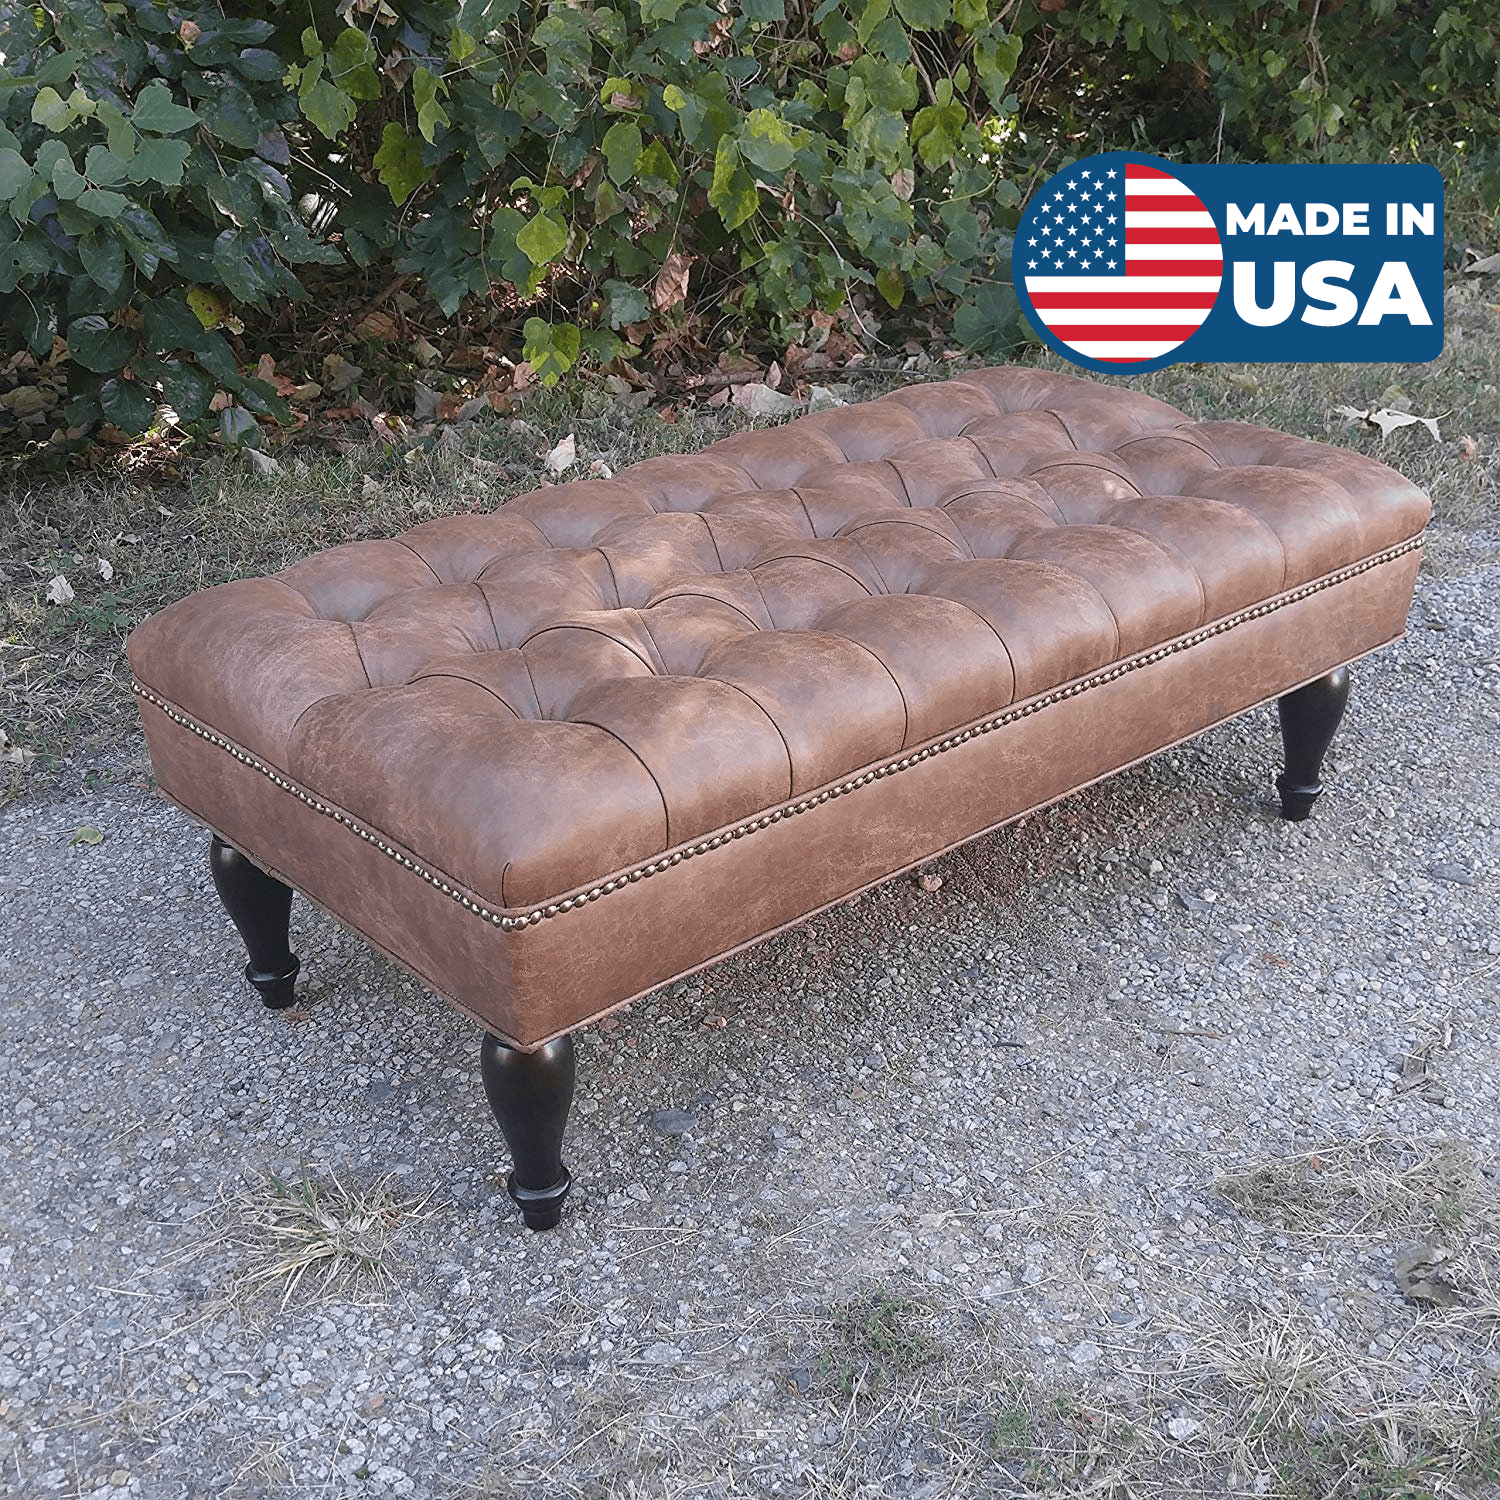 Design 59 LARGE Vegan Leather Tufted Ottoman, Footstool, Upholstered Coffee Table, 46"x24" - Design59